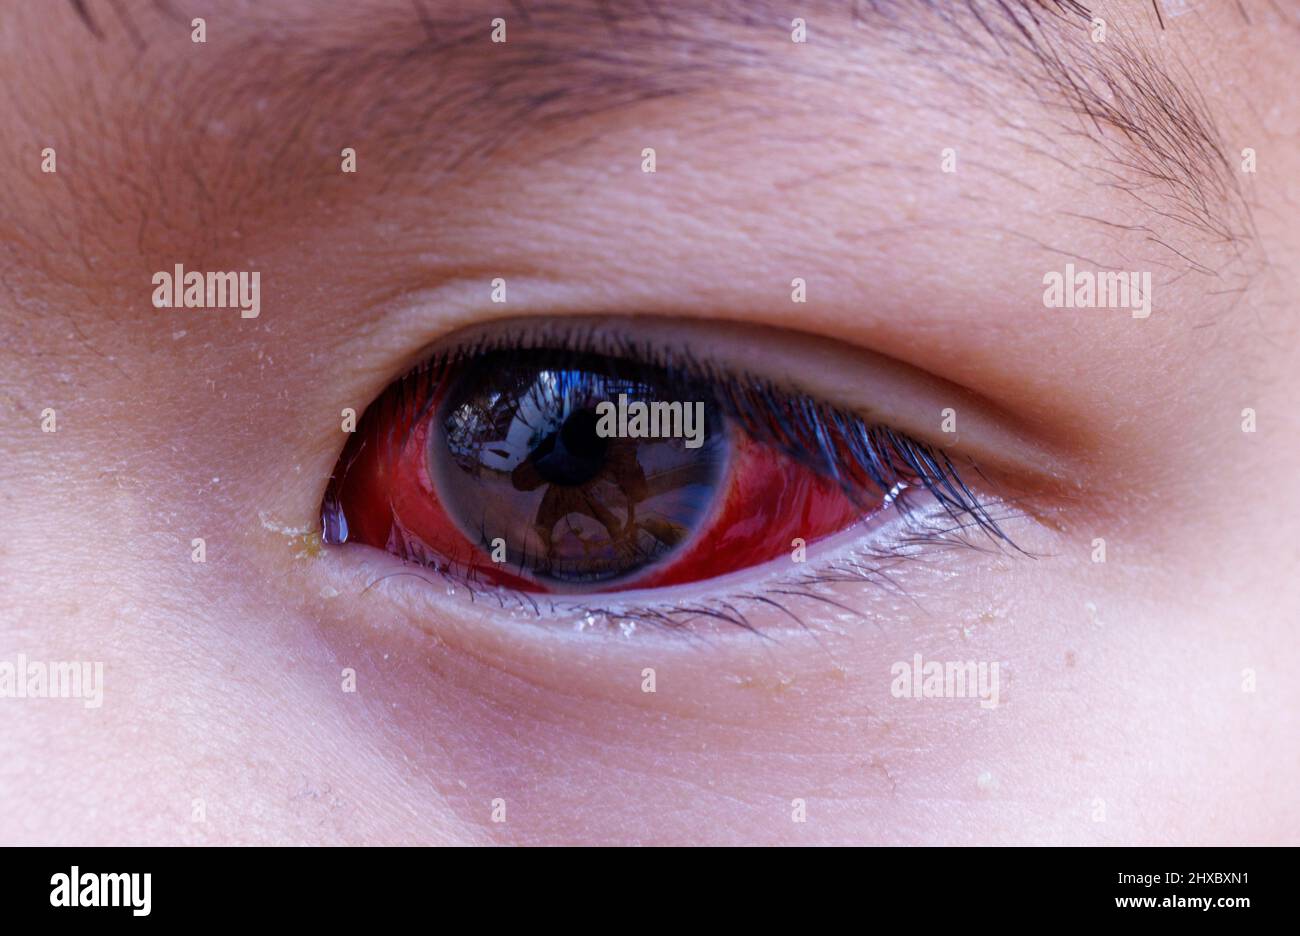 bloodshot eye of child after surgery for strabismus Stock Photo